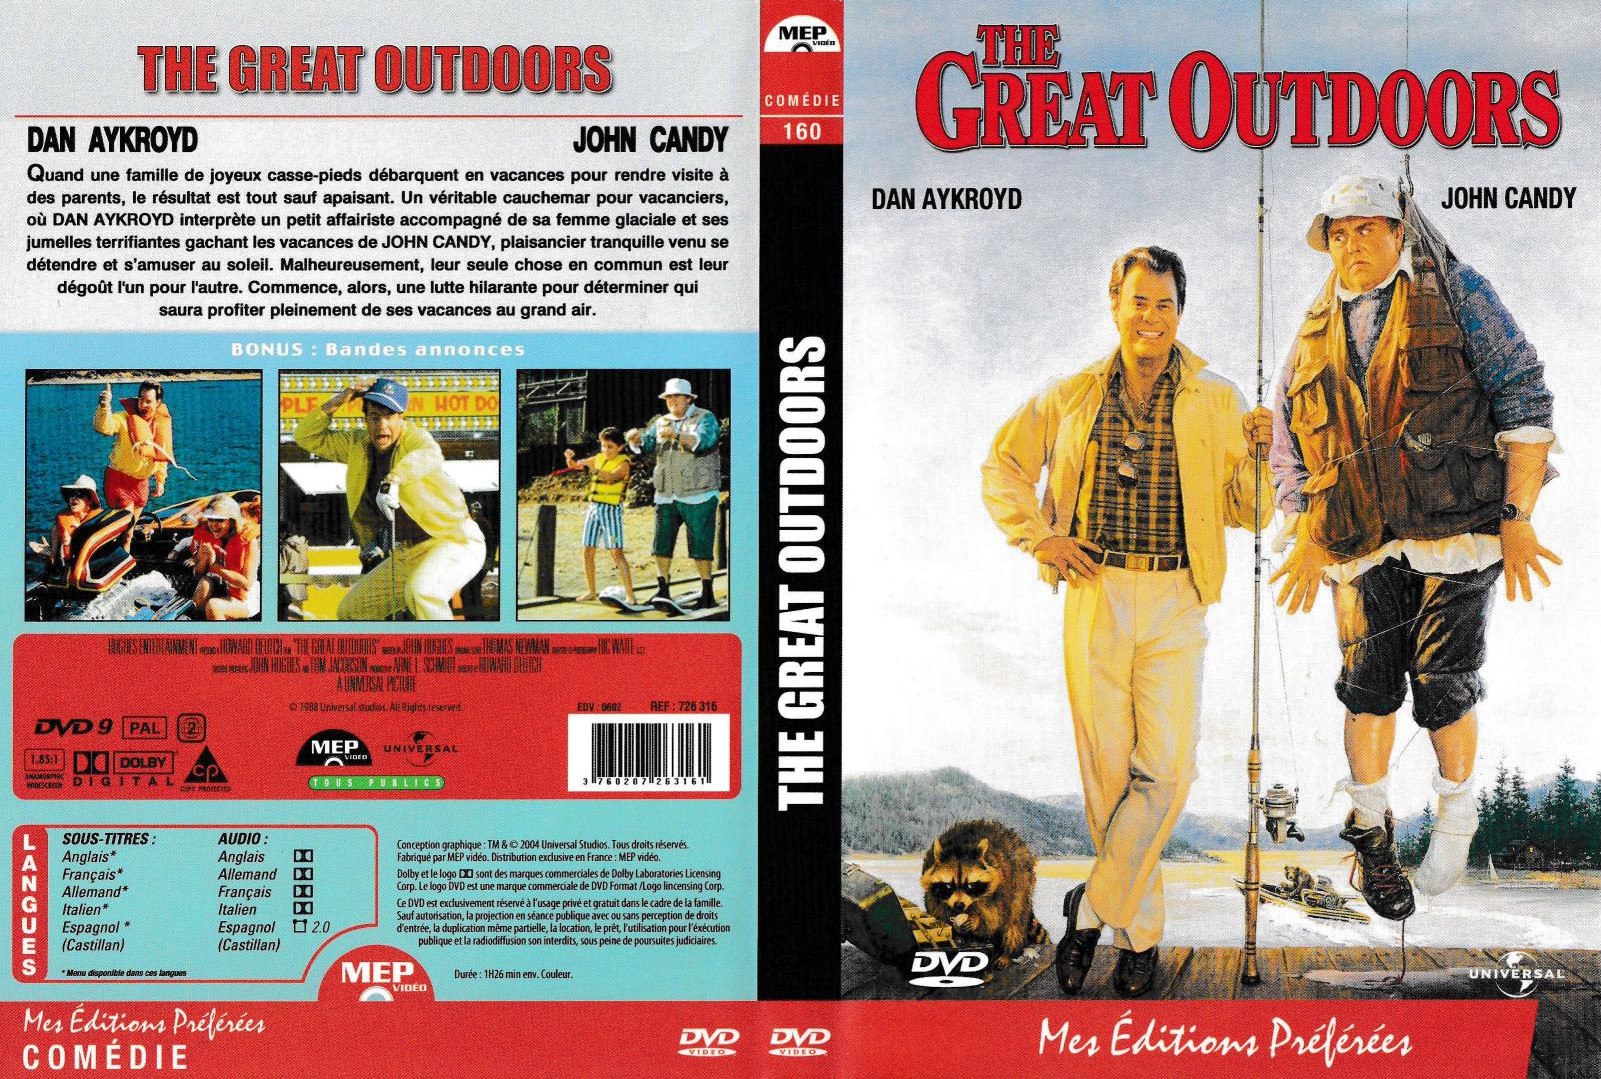 Jaquette DVD The great outdoors